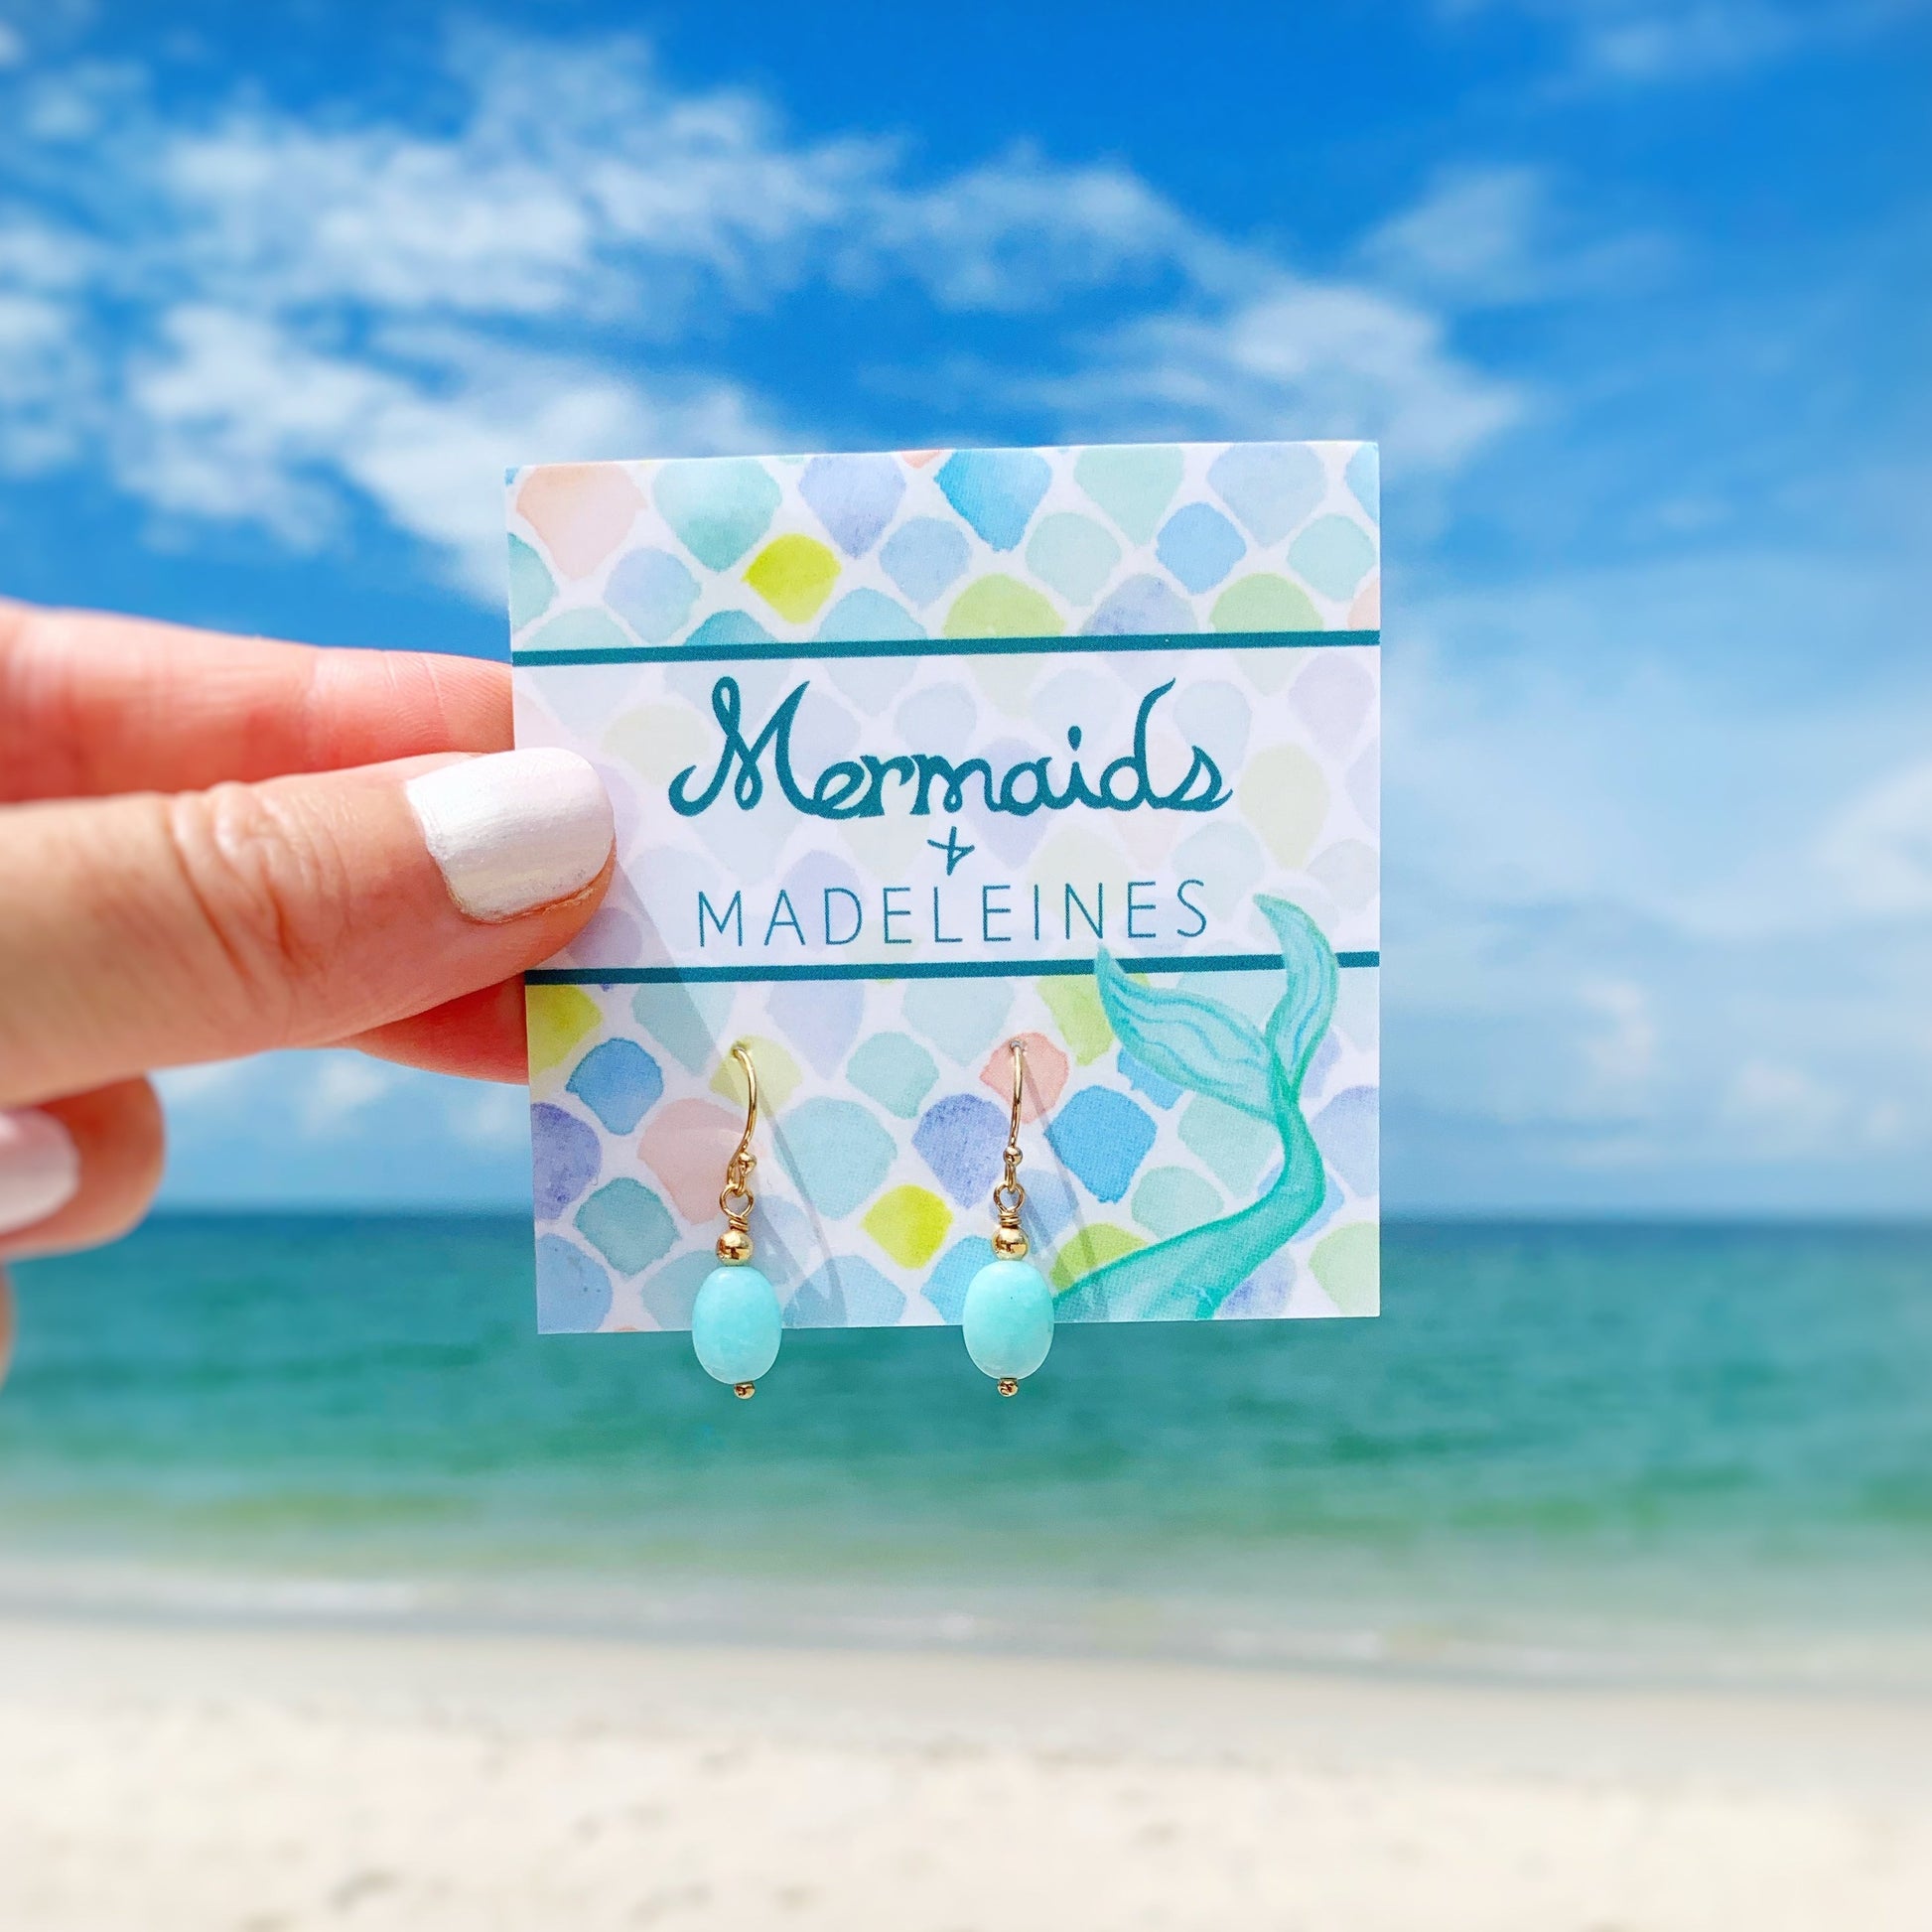 Laguna Earrings by mermaids and madeleines are aqua amazonite oval stones with 14k gold filled findings. this pair is hanging on a branded earring card and held up in front of a beach background